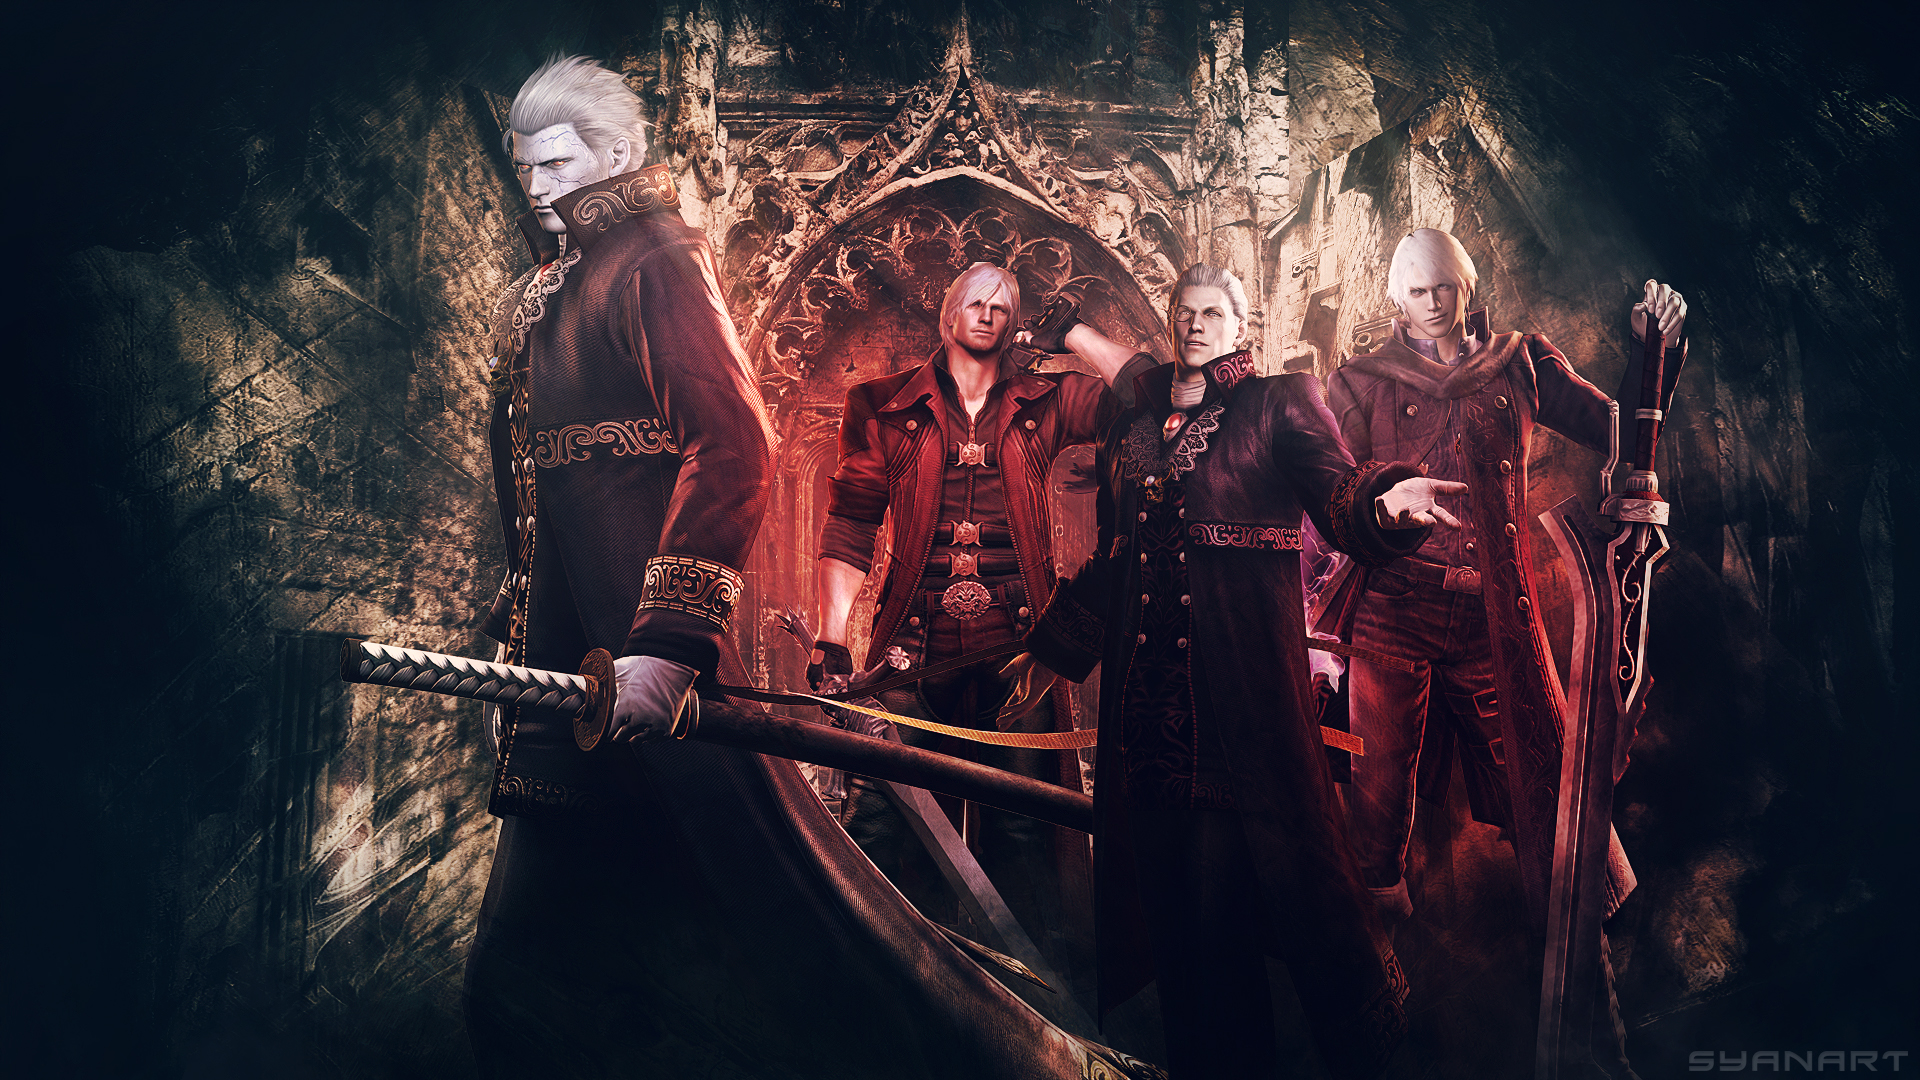 Video Game Devil May Cry 4 HD Wallpaper | Background Image